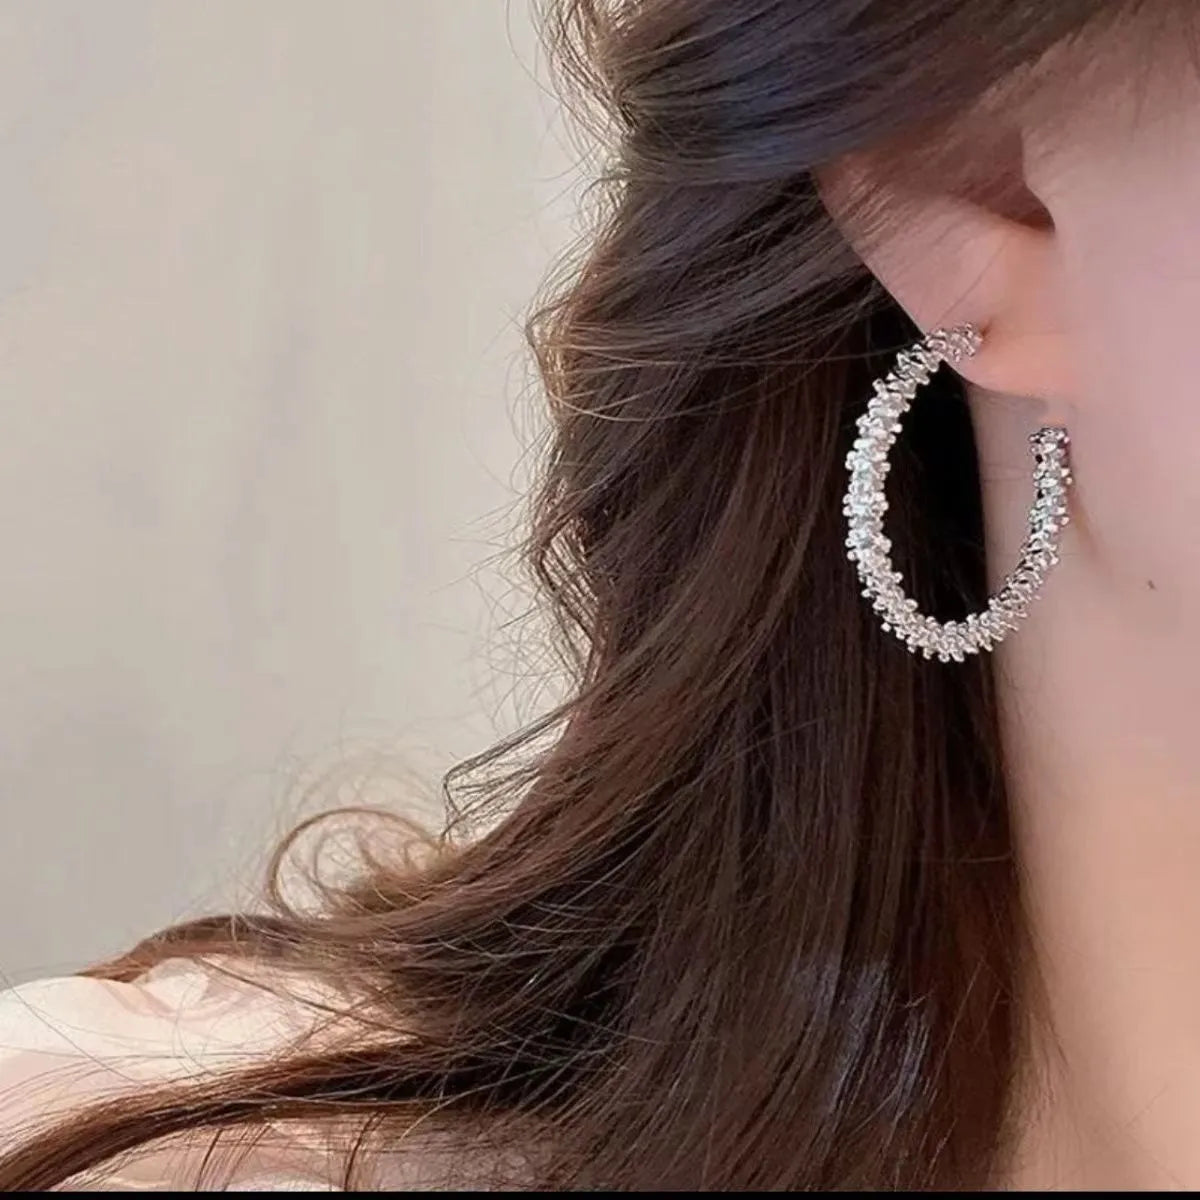 2023 New Fashion Trend Unique Design Elegant Delicate Geometric Round Earrings For Women Jewelry Wedding Party Premium Gifts